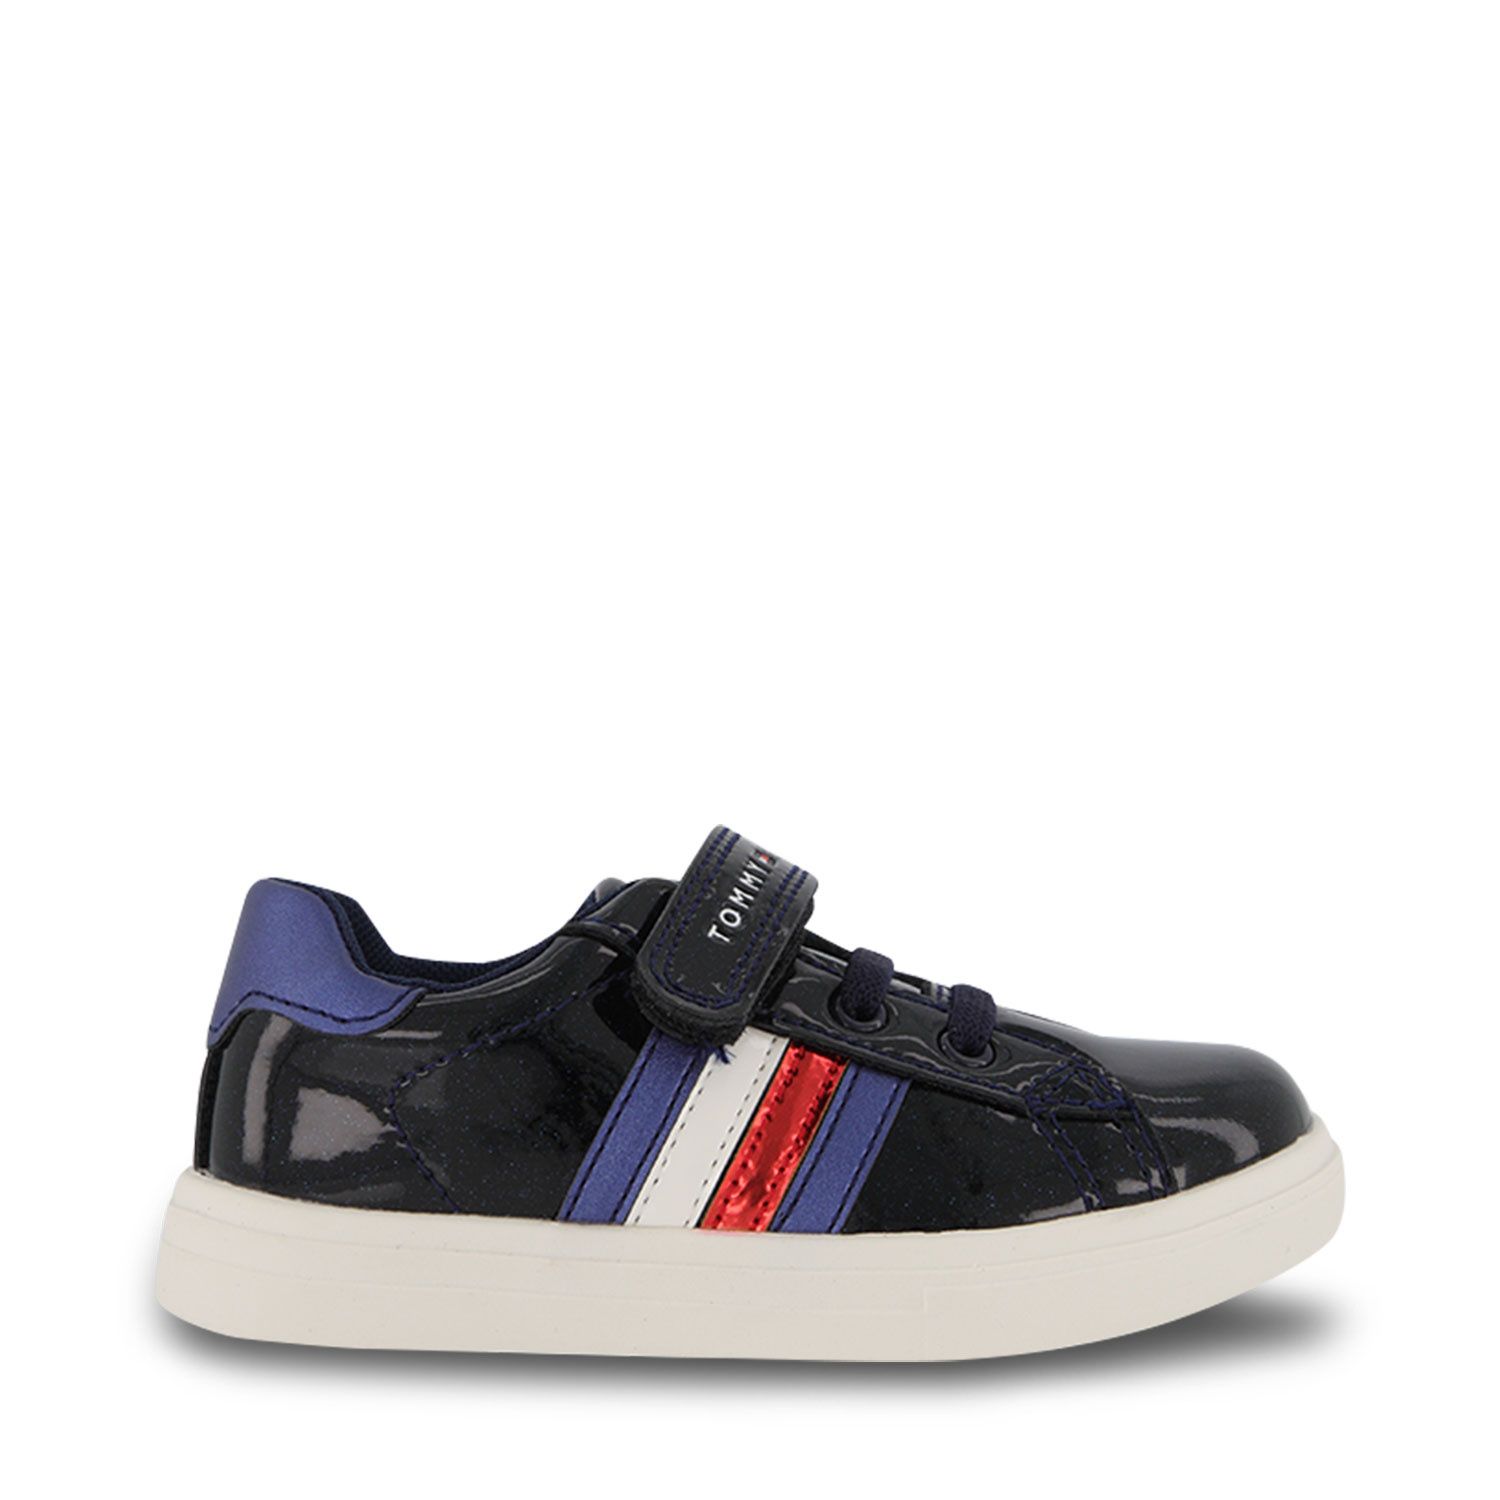 Picture of Tommy Hilfiger 31149 kids sneakers navy